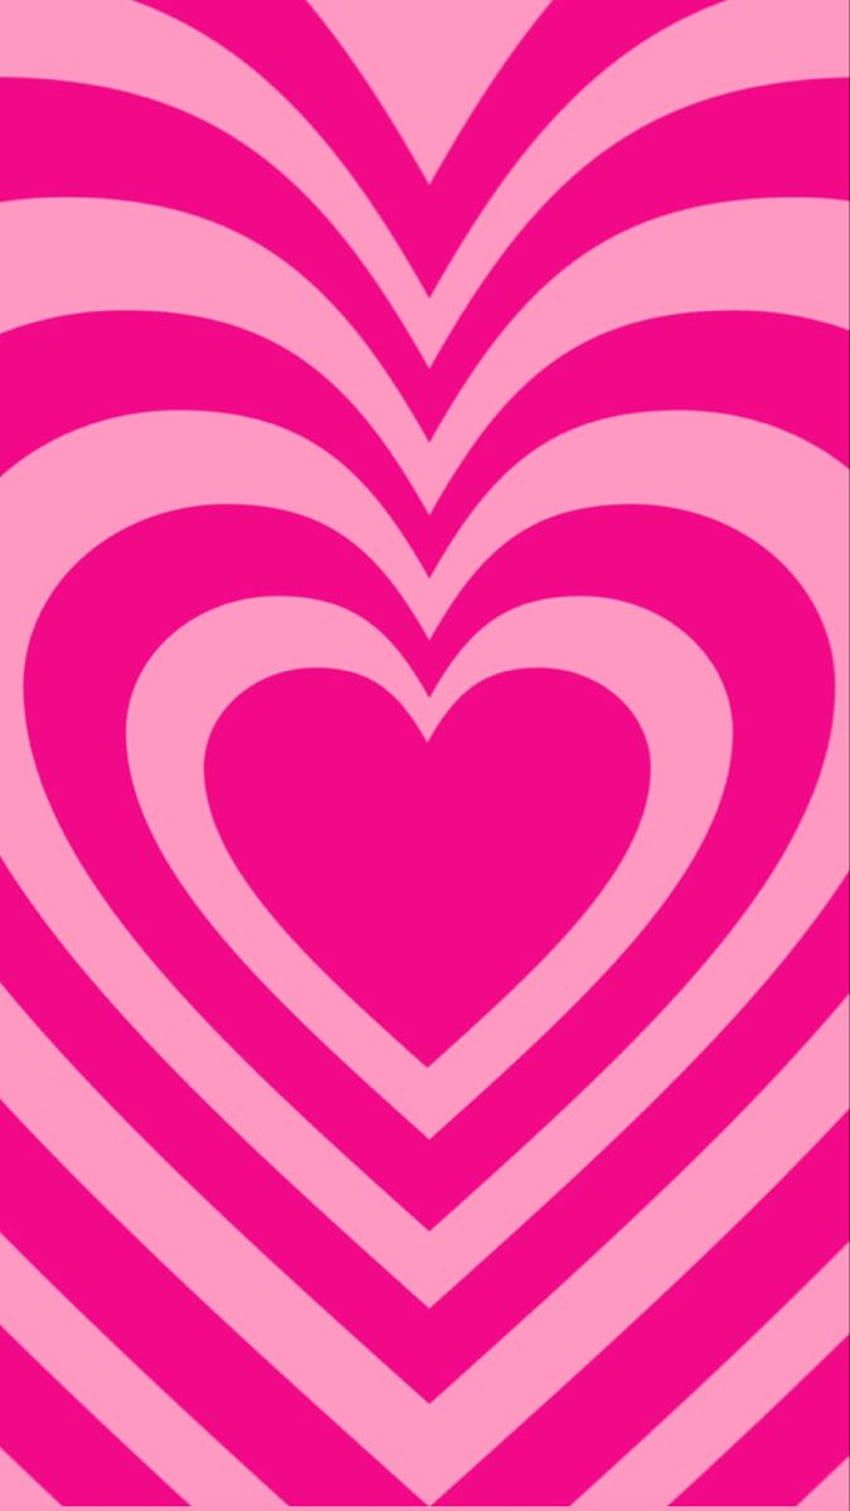 A pink and white striped heart pattern - Heart, pink heart